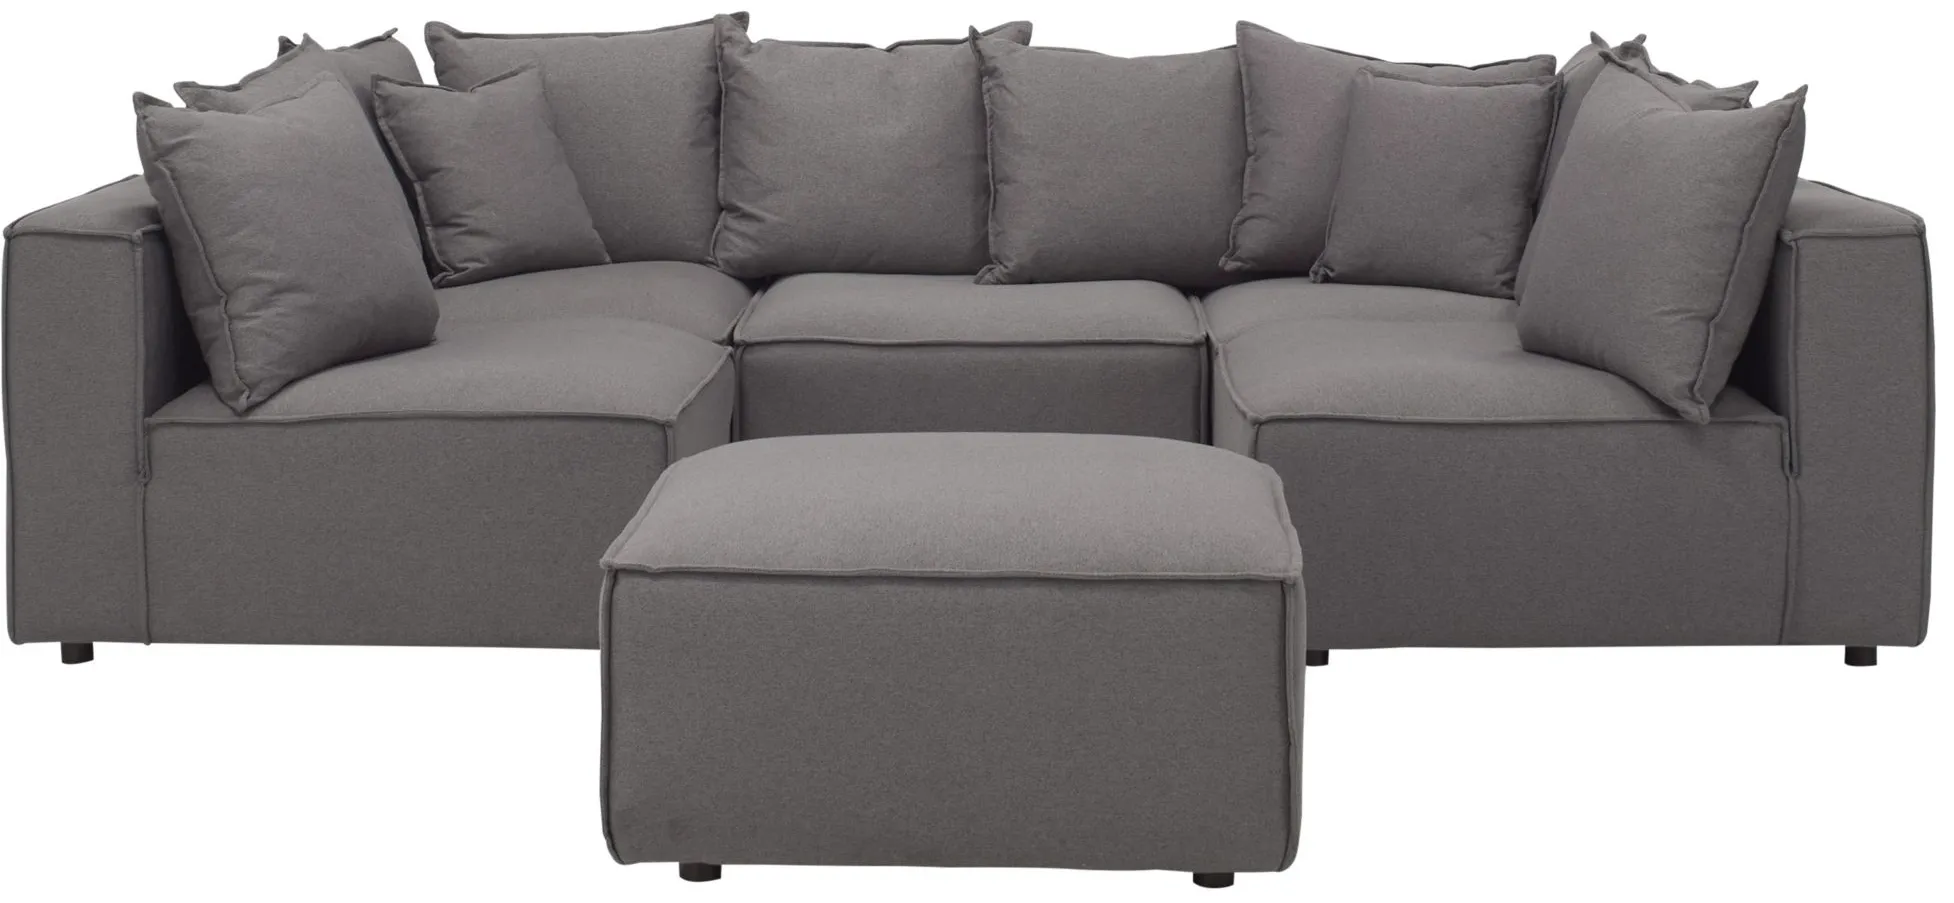 Loris Chenille 5-pc. Pit Sectional with Cocktail Ottoman in Gray by Aria Designs